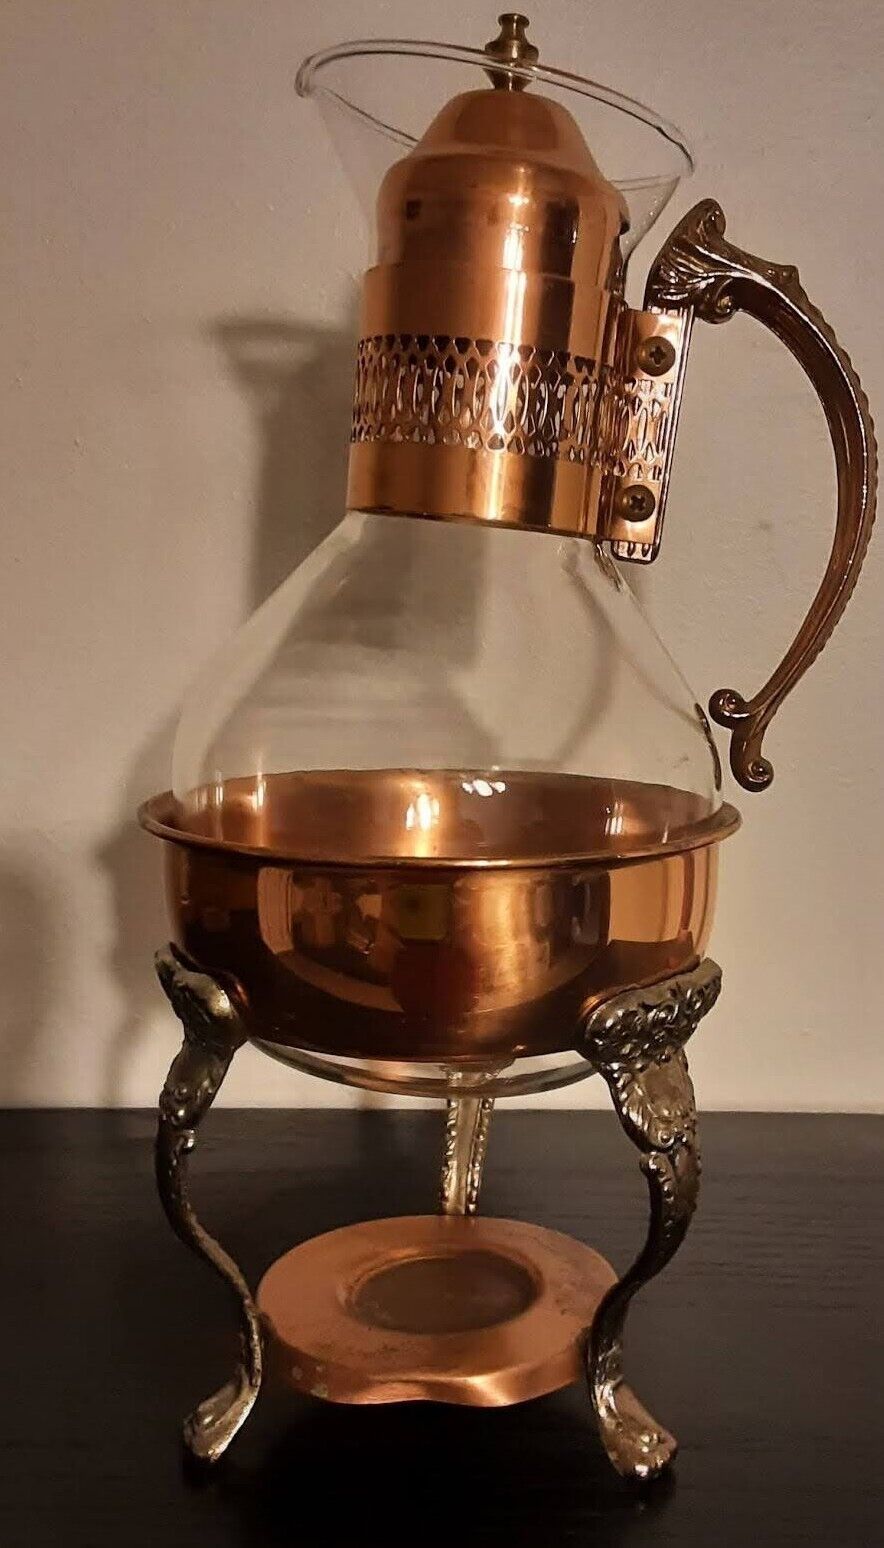 Vintage Copper Coffee Carafe Glass Pot with Warmer Stand